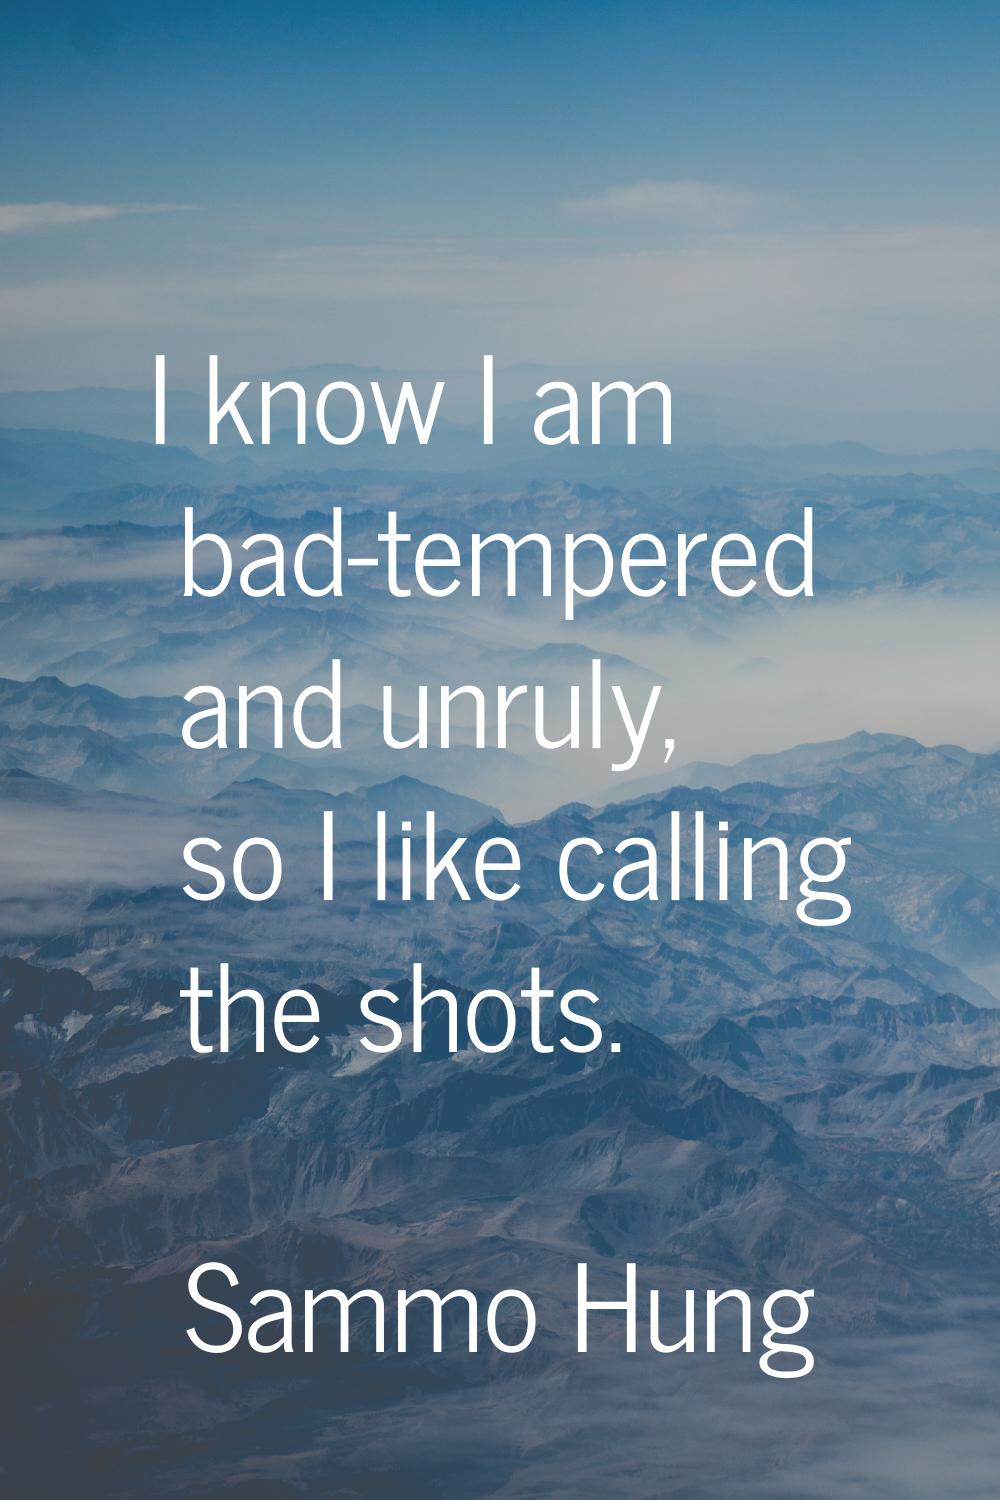 I know I am bad-tempered and unruly, so I like calling the shots.